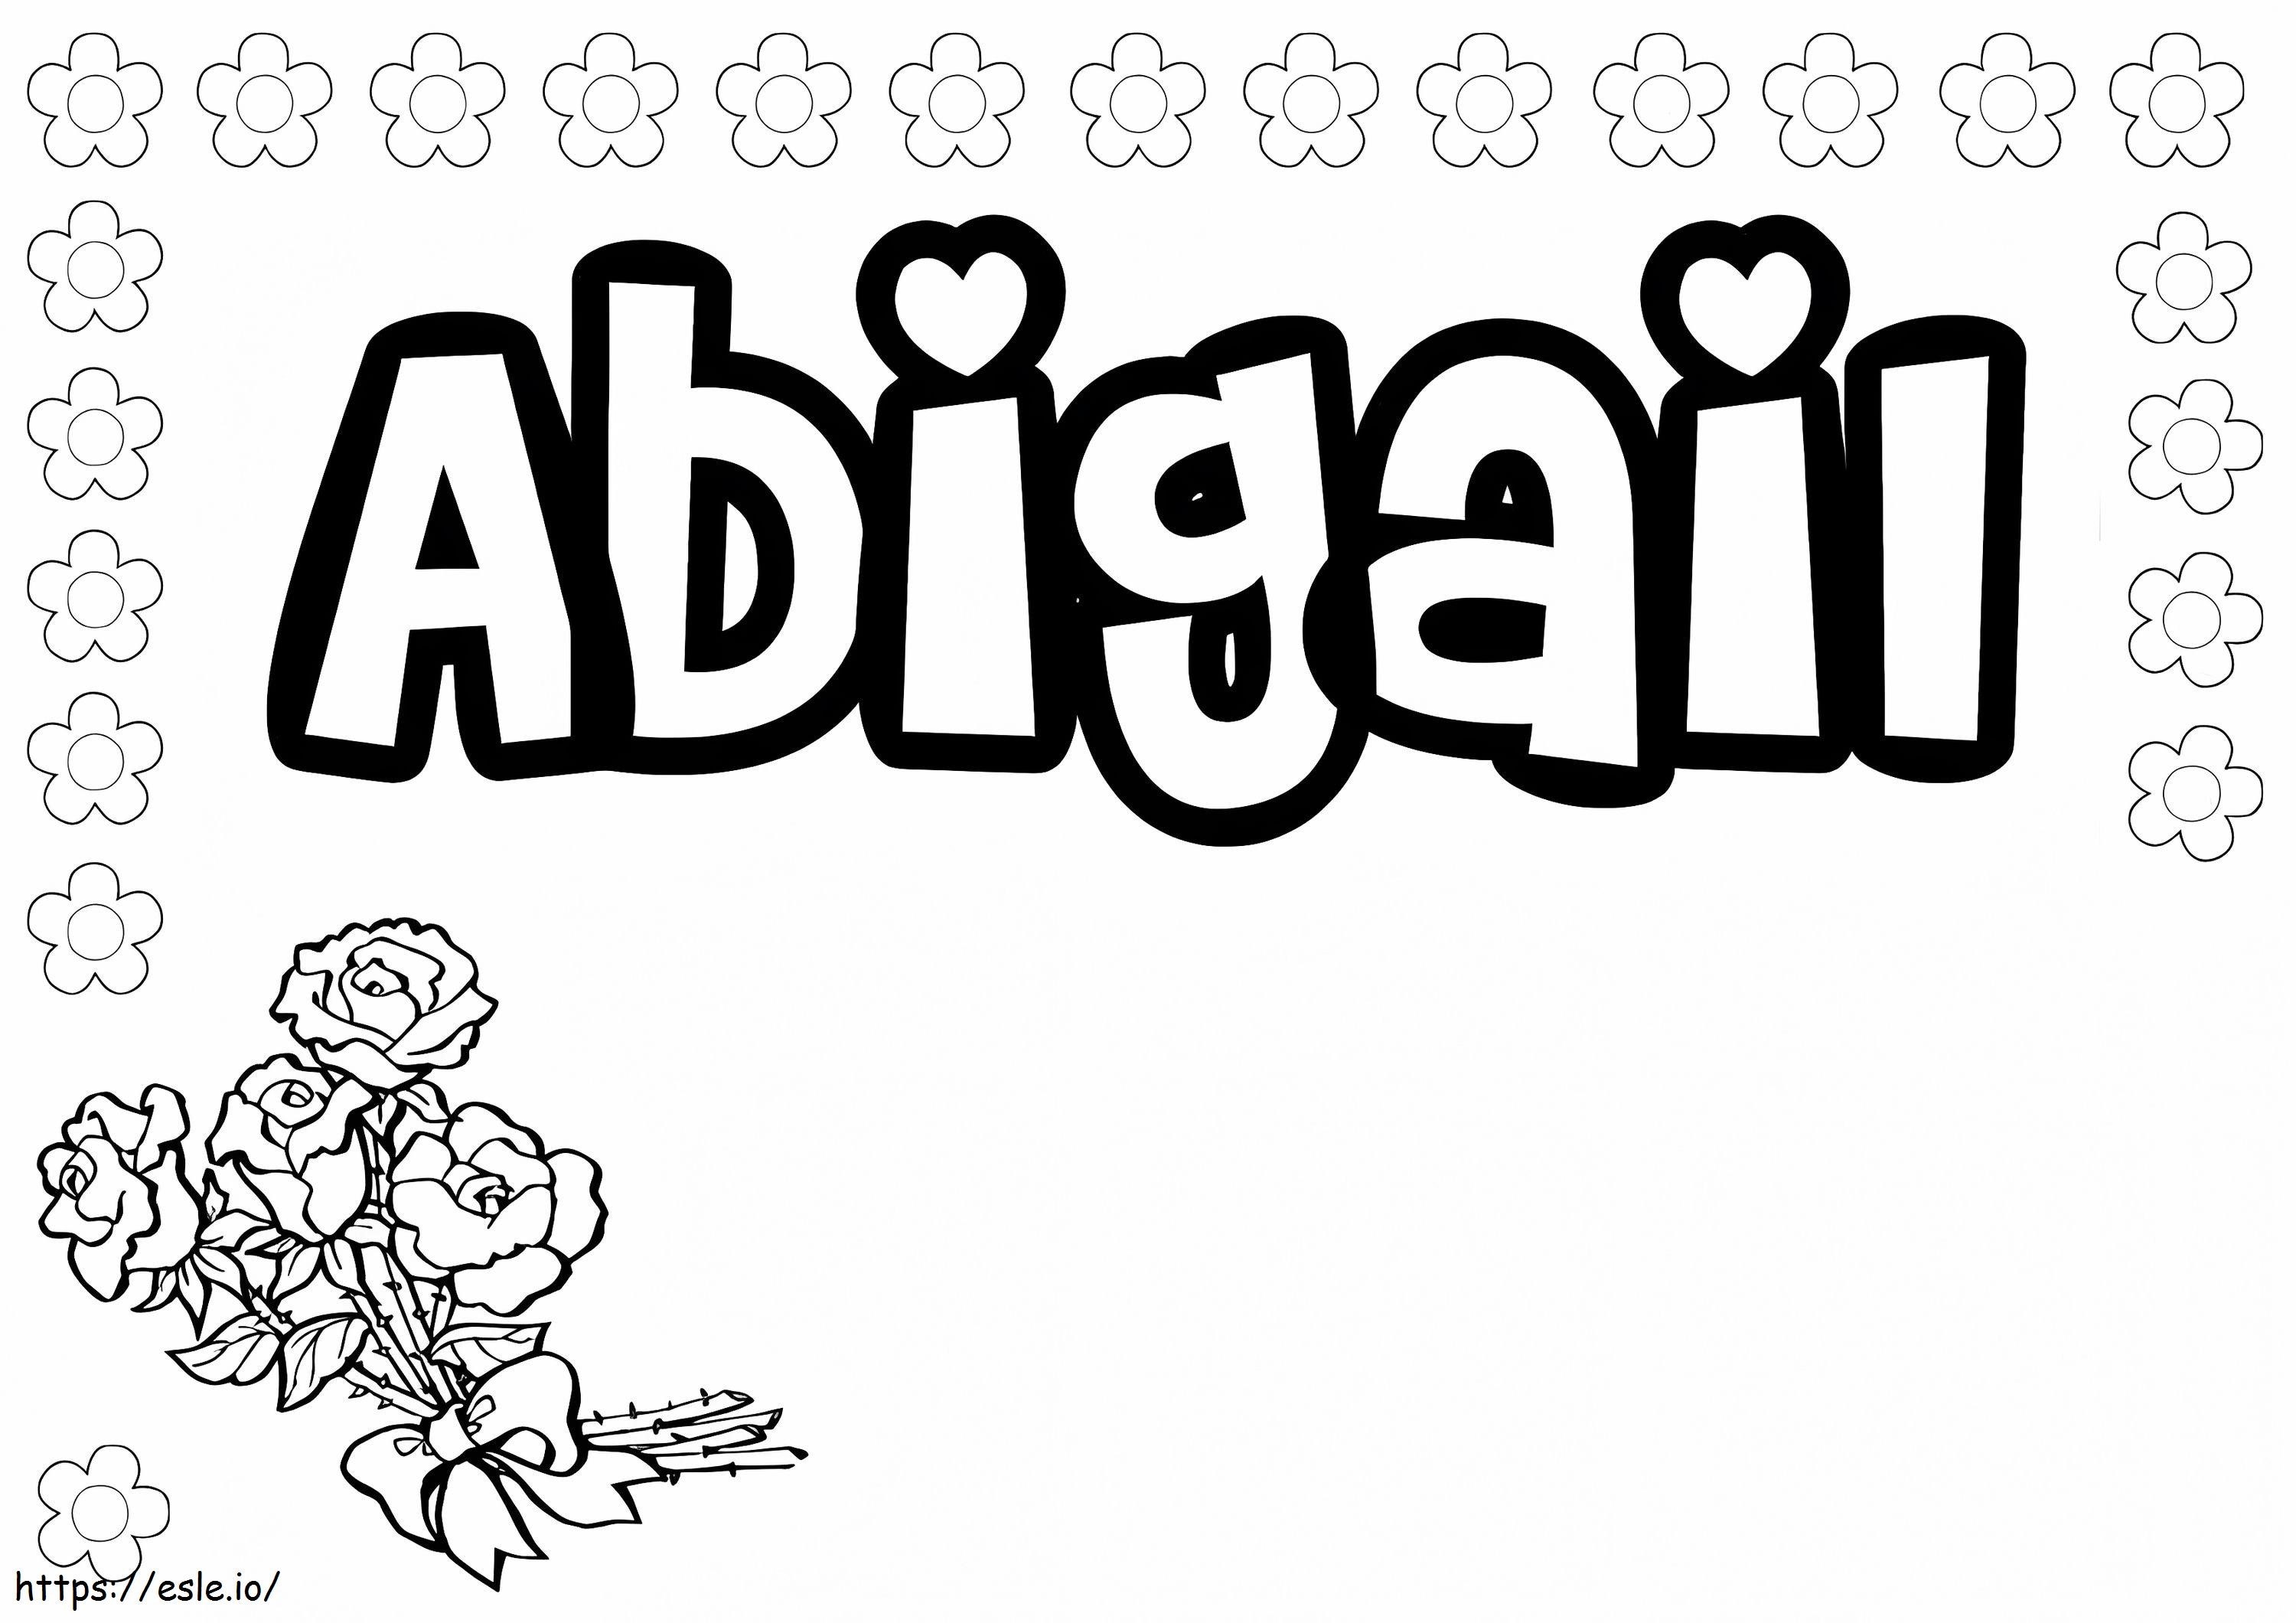 Free Abigail coloring page